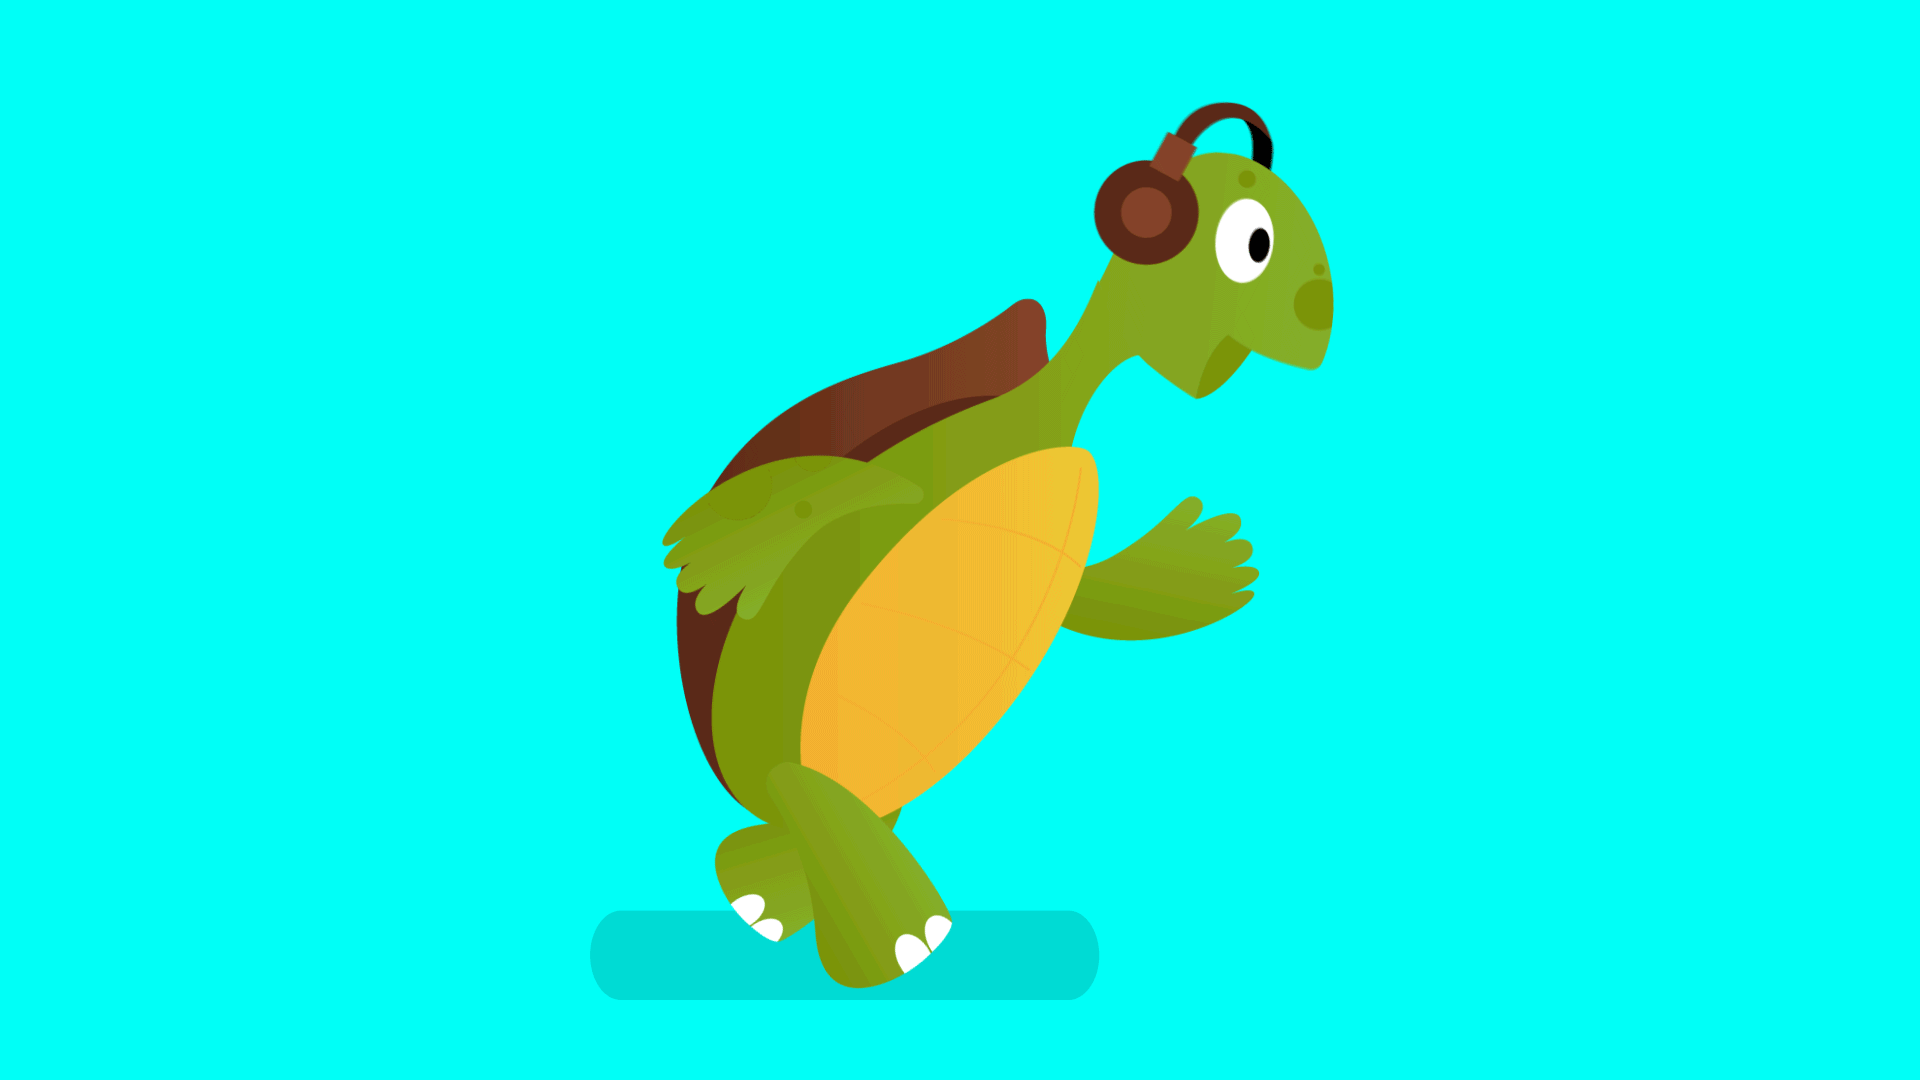 A terrapin walking while listening to podcasts on headphones.